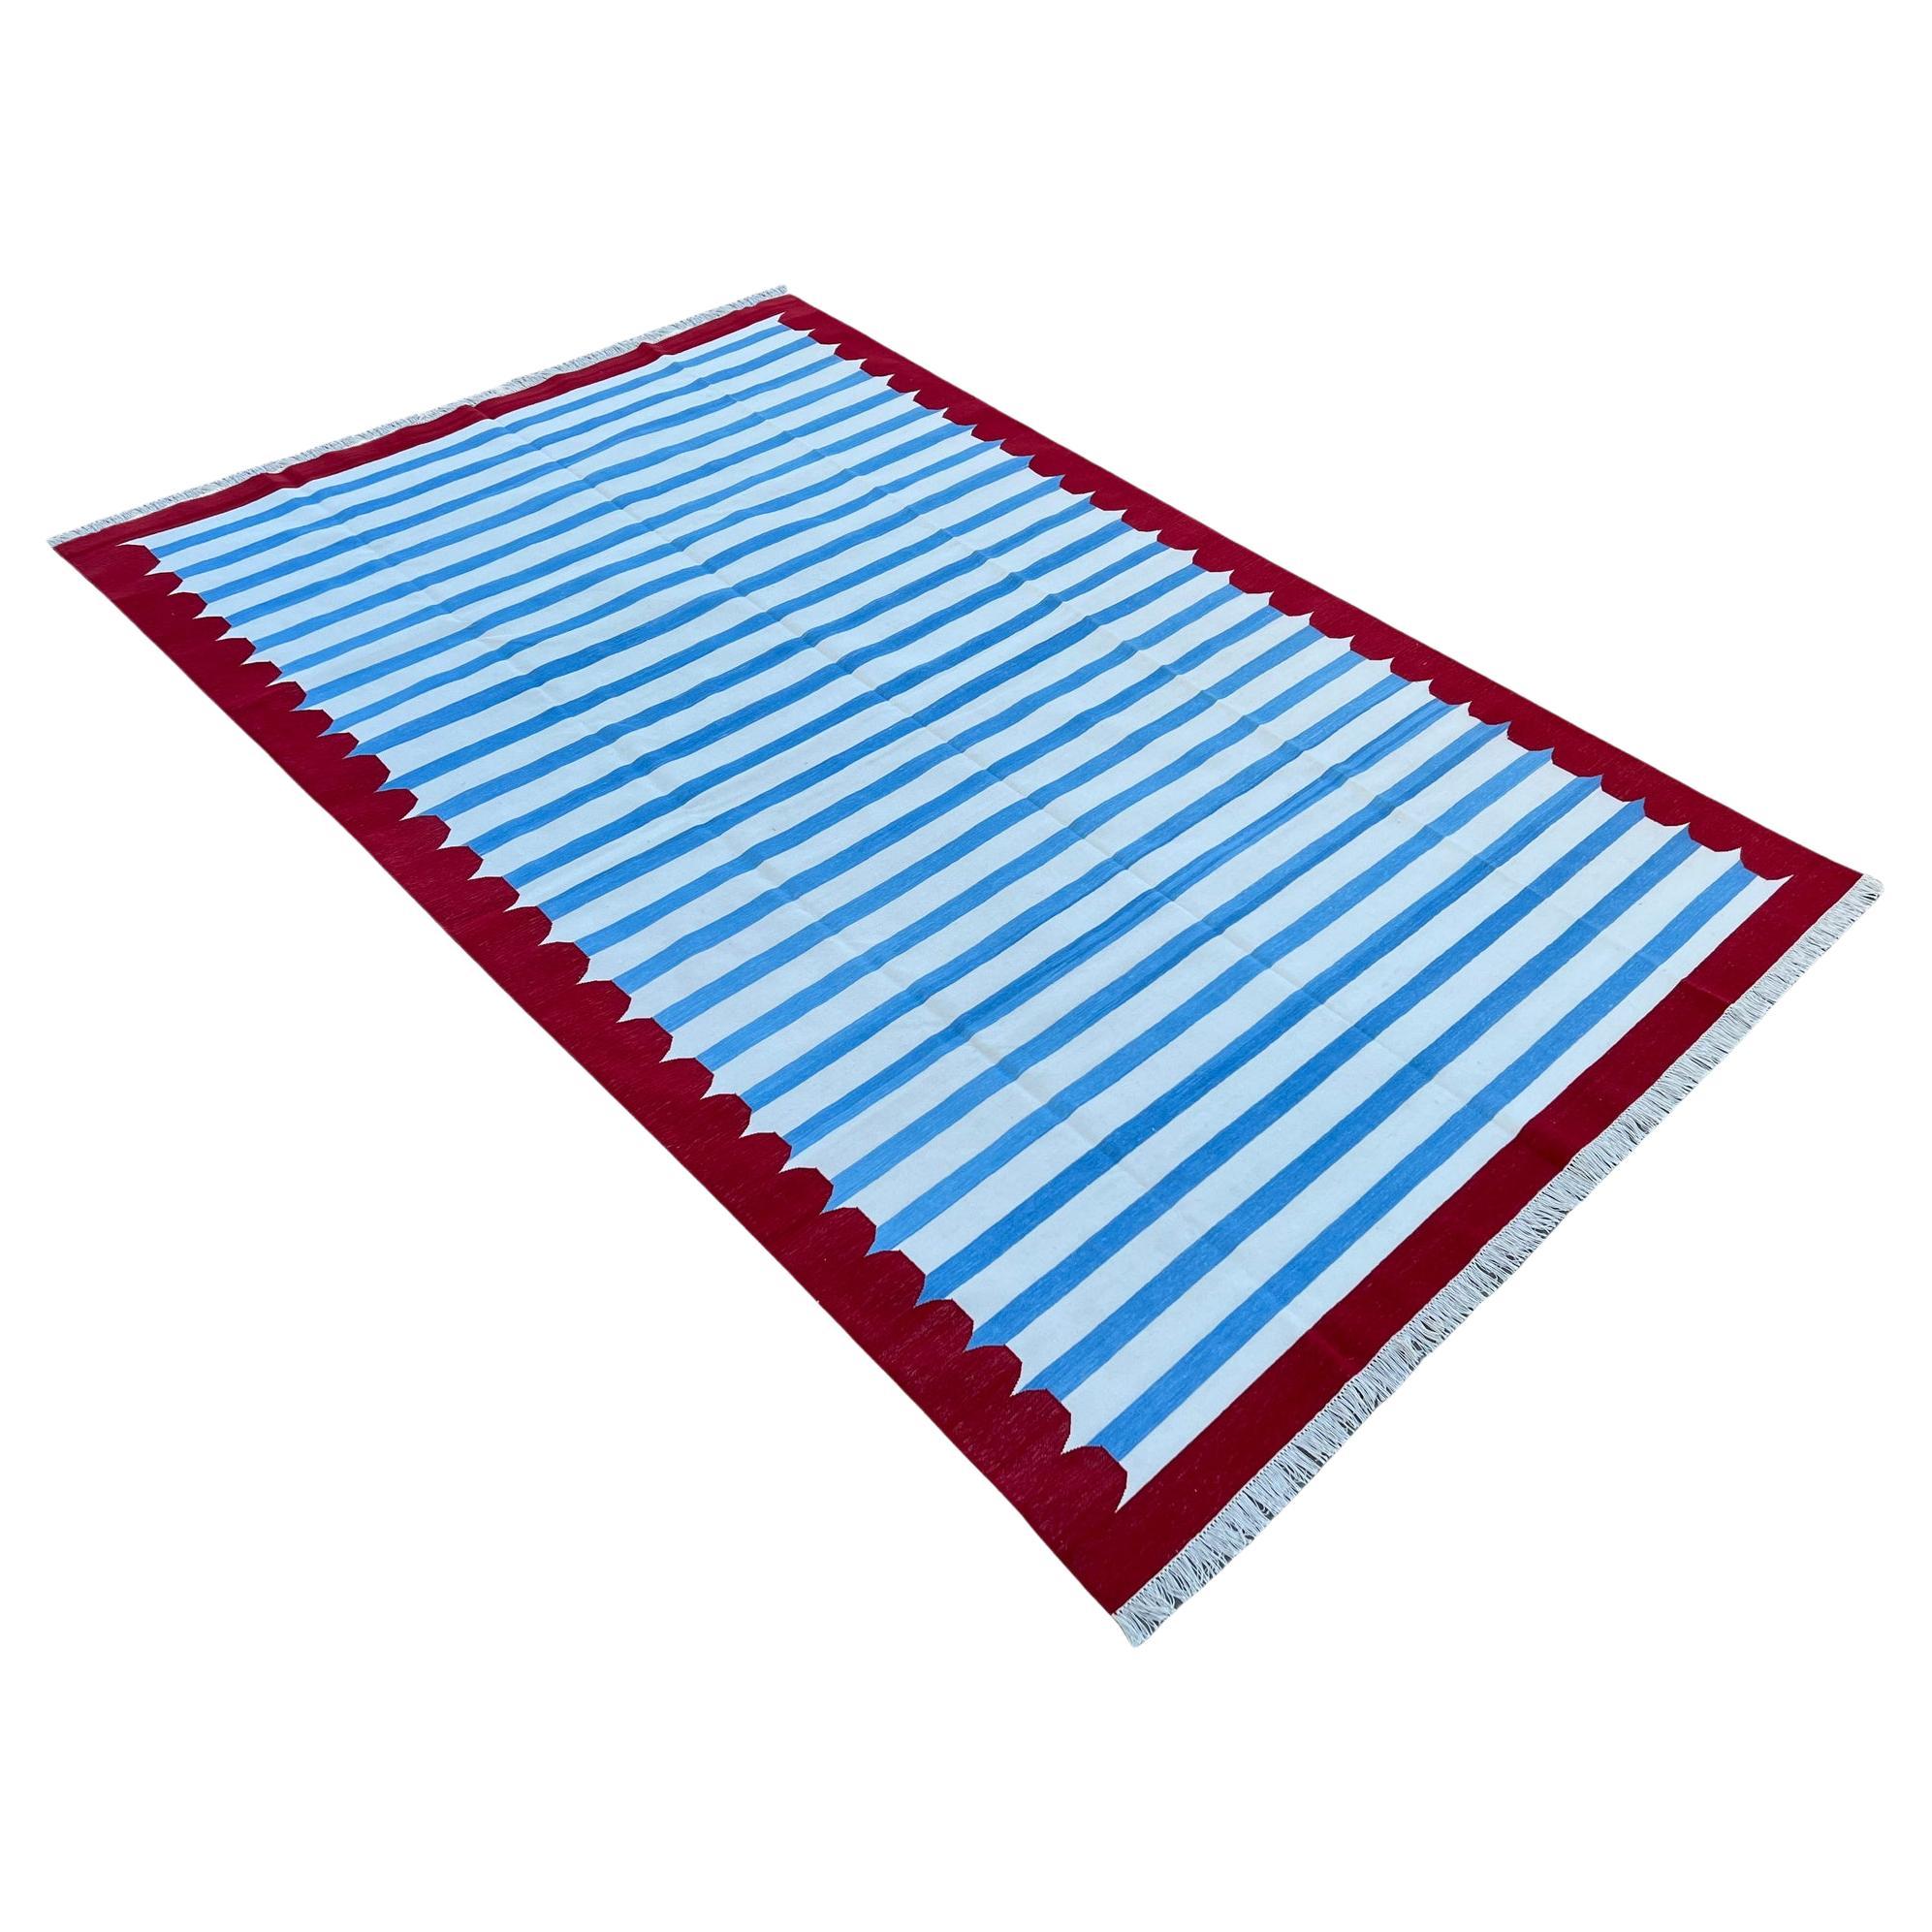 Handmade Cotton Area Flat Weave Rug, 8x10 Blue And Red Striped Indian Dhurrie For Sale